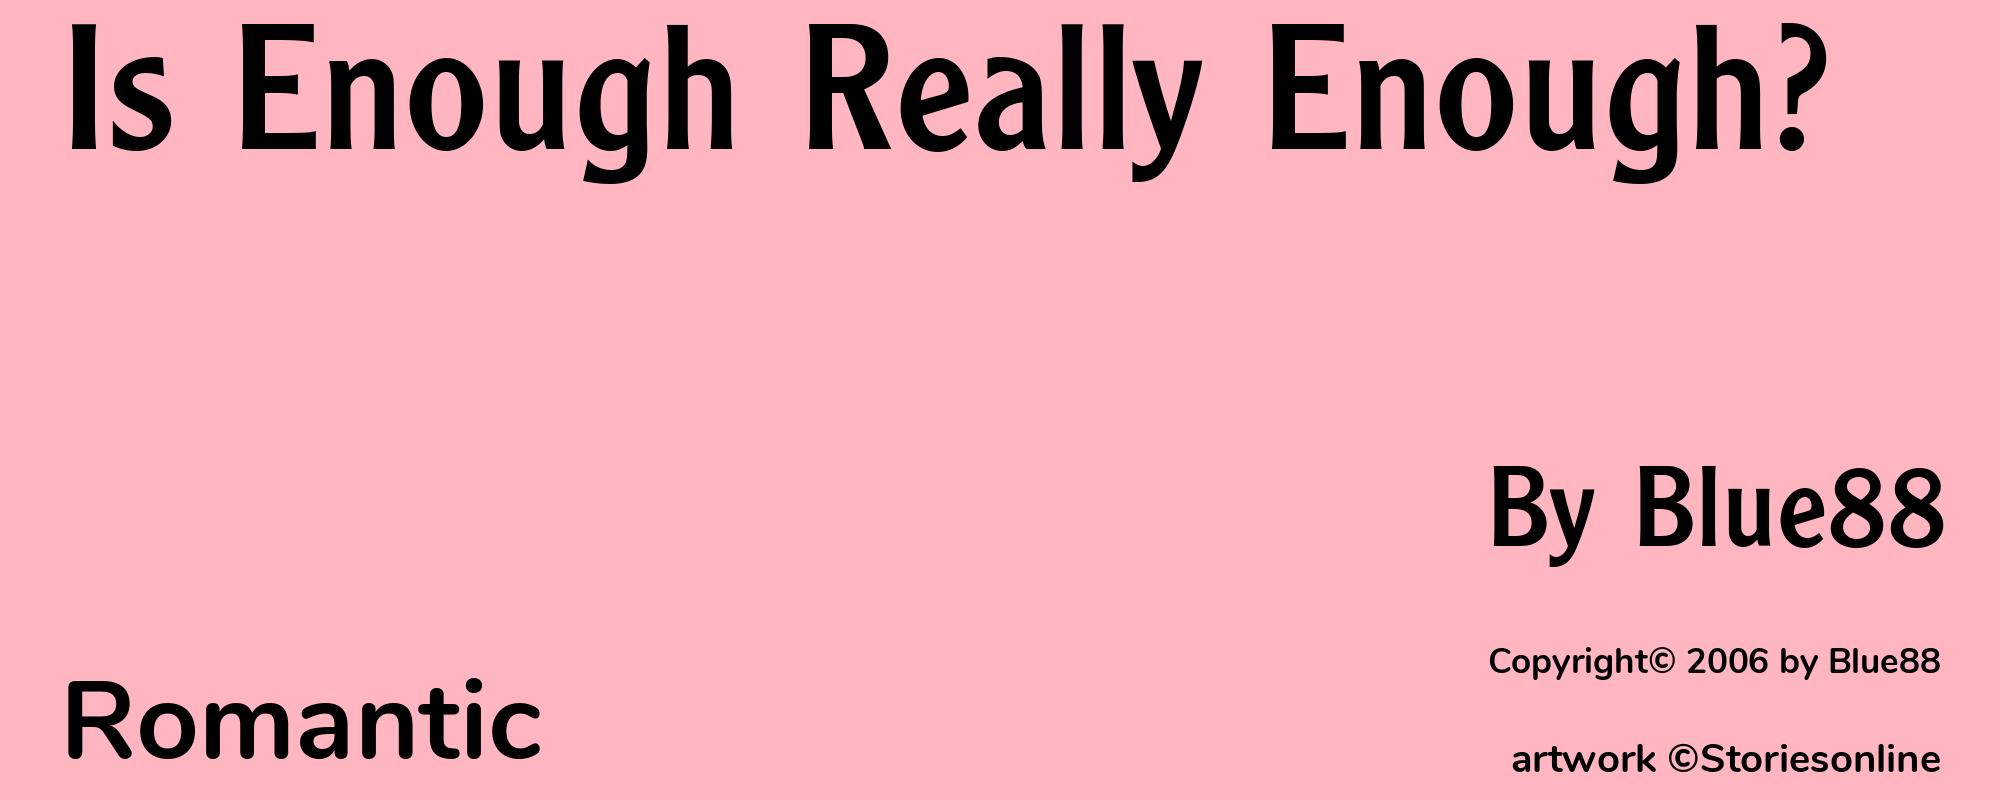 Is Enough Really Enough? - Cover